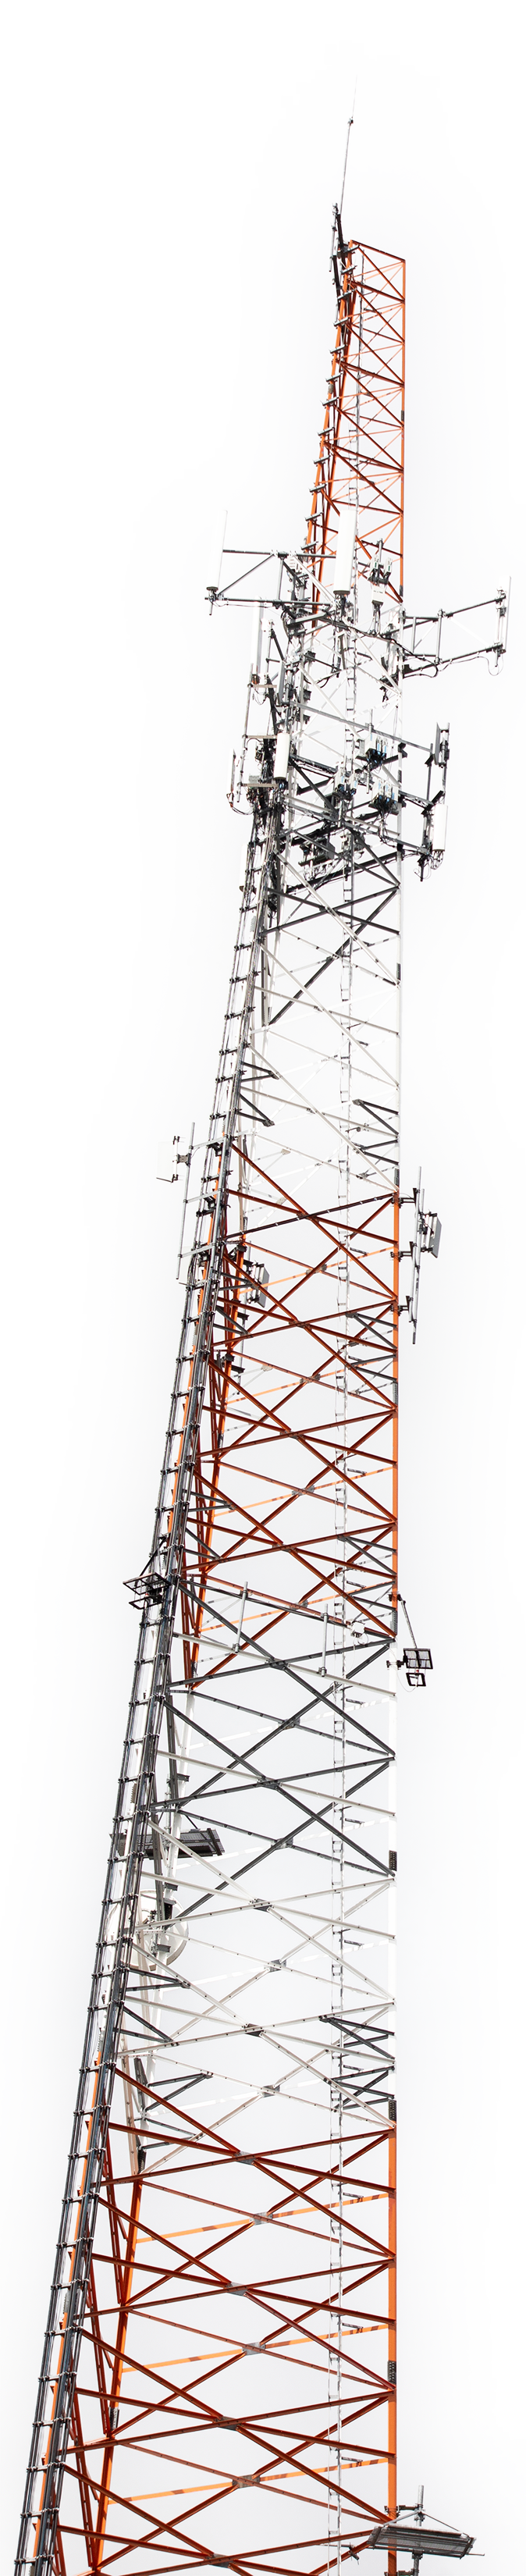 Photo of a cellular tower.